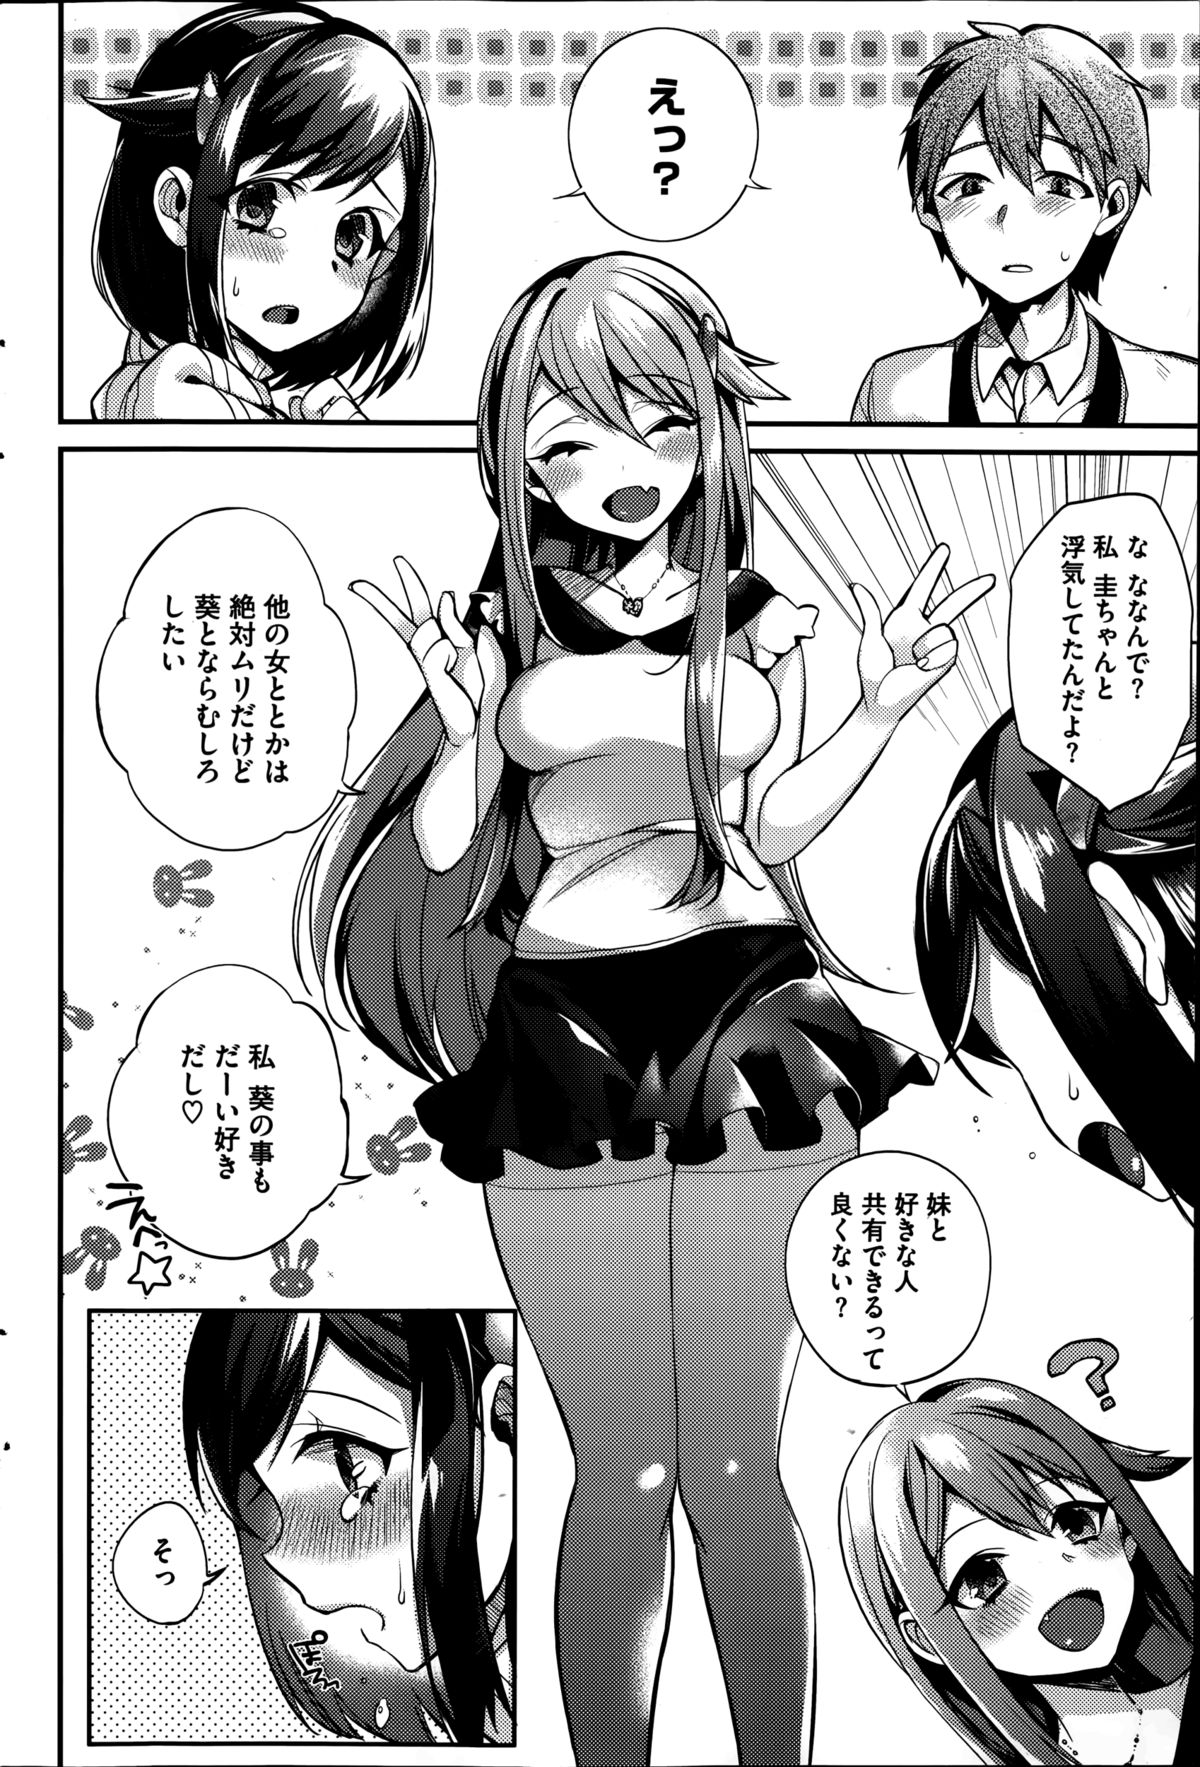 [Shindou] Sisters Conflict Ch.1-2 page 34 full